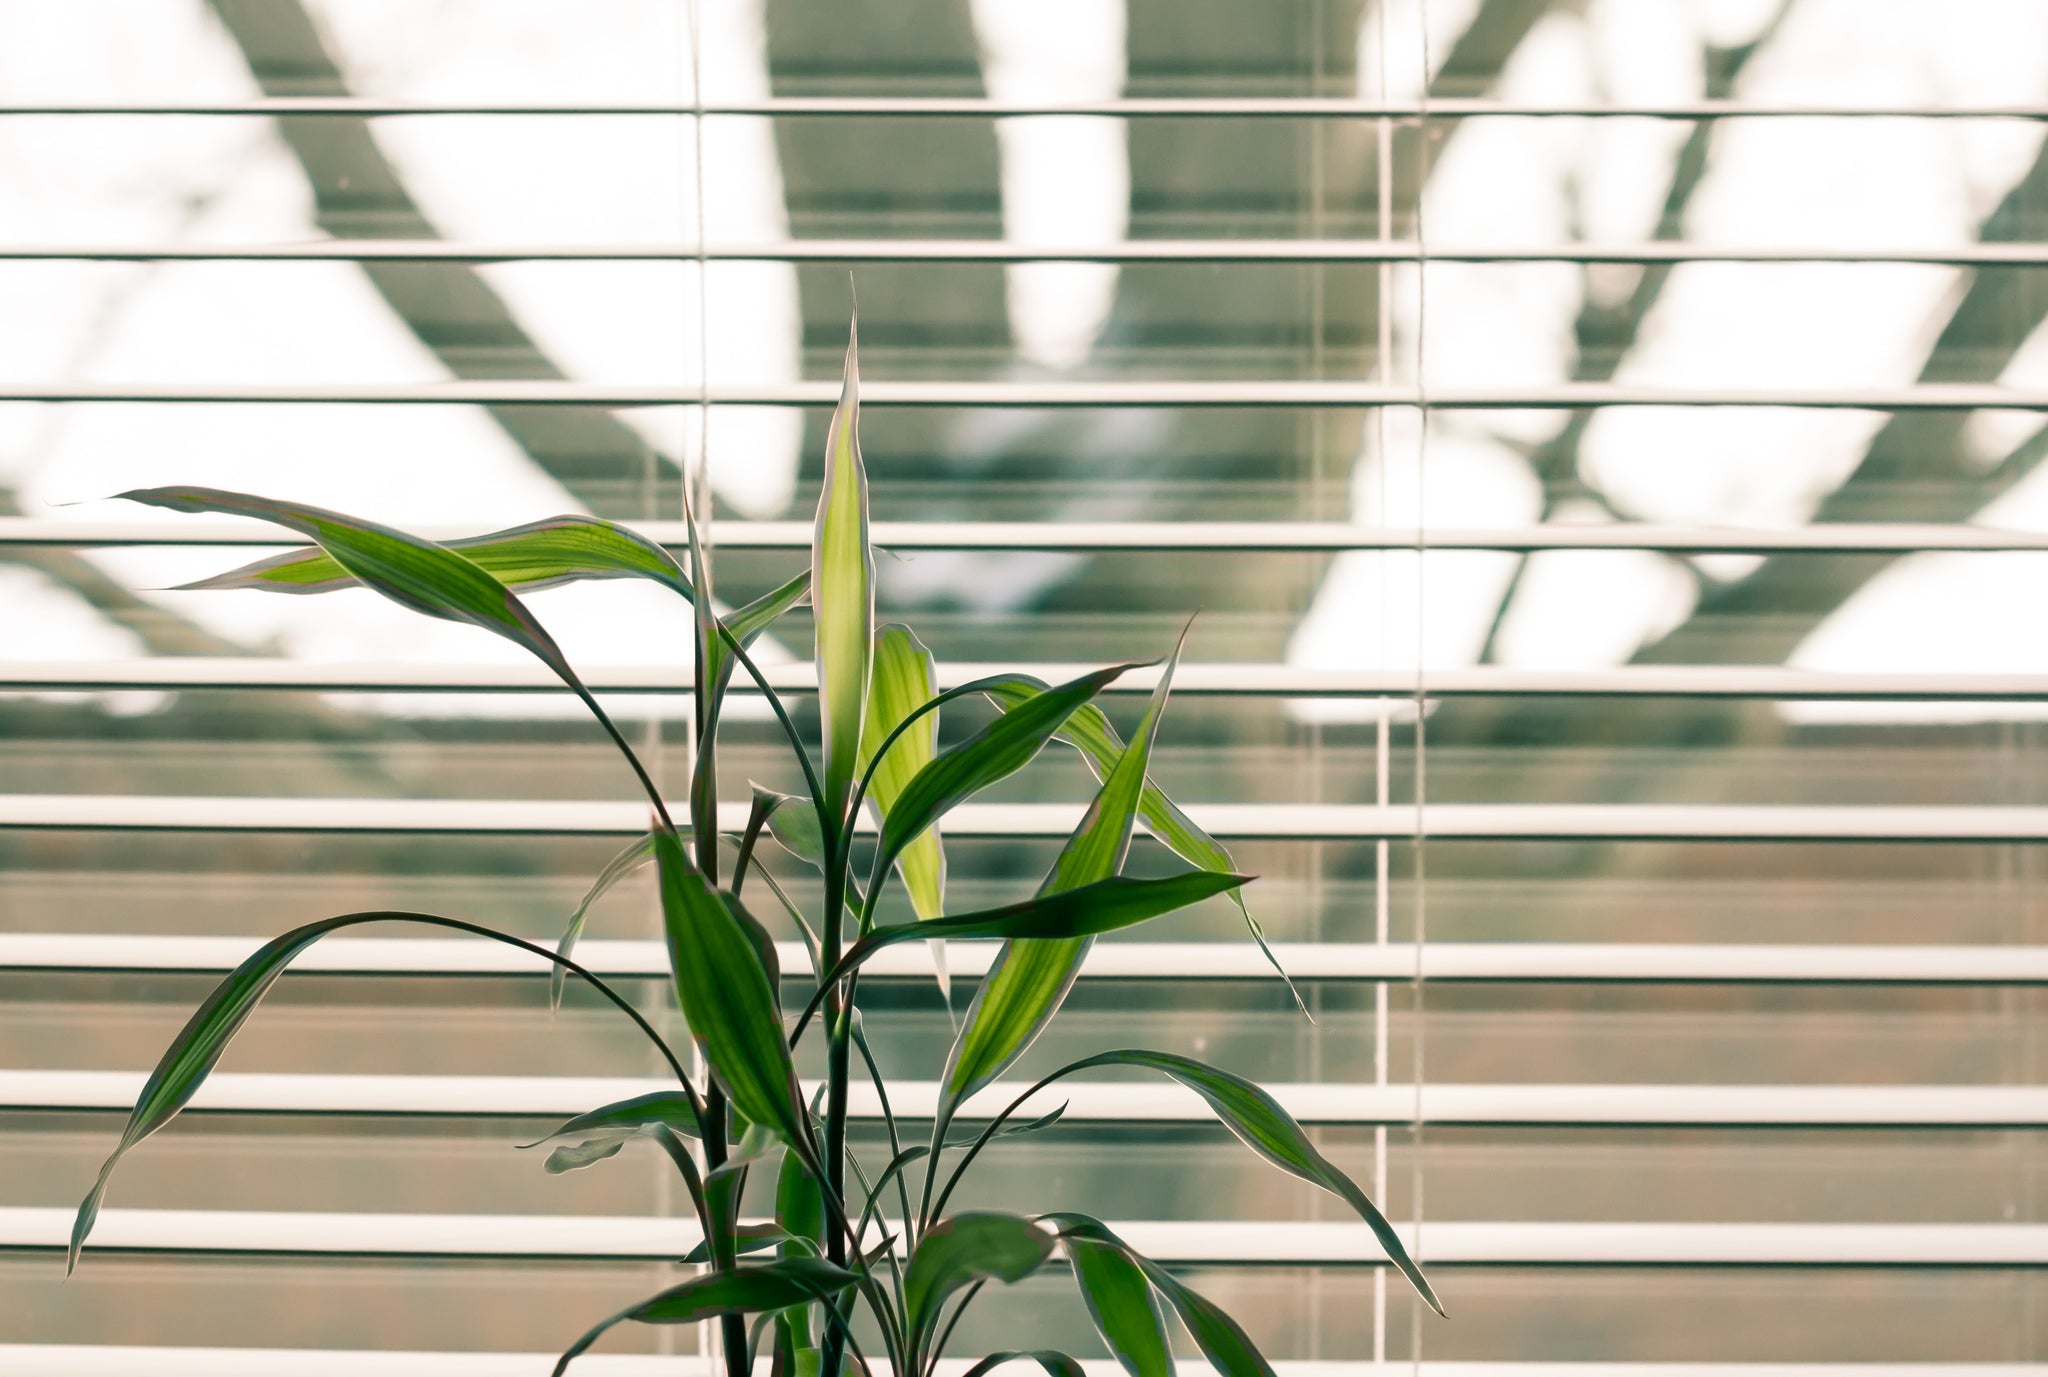 5 benefits to setting your blinds on a schedule